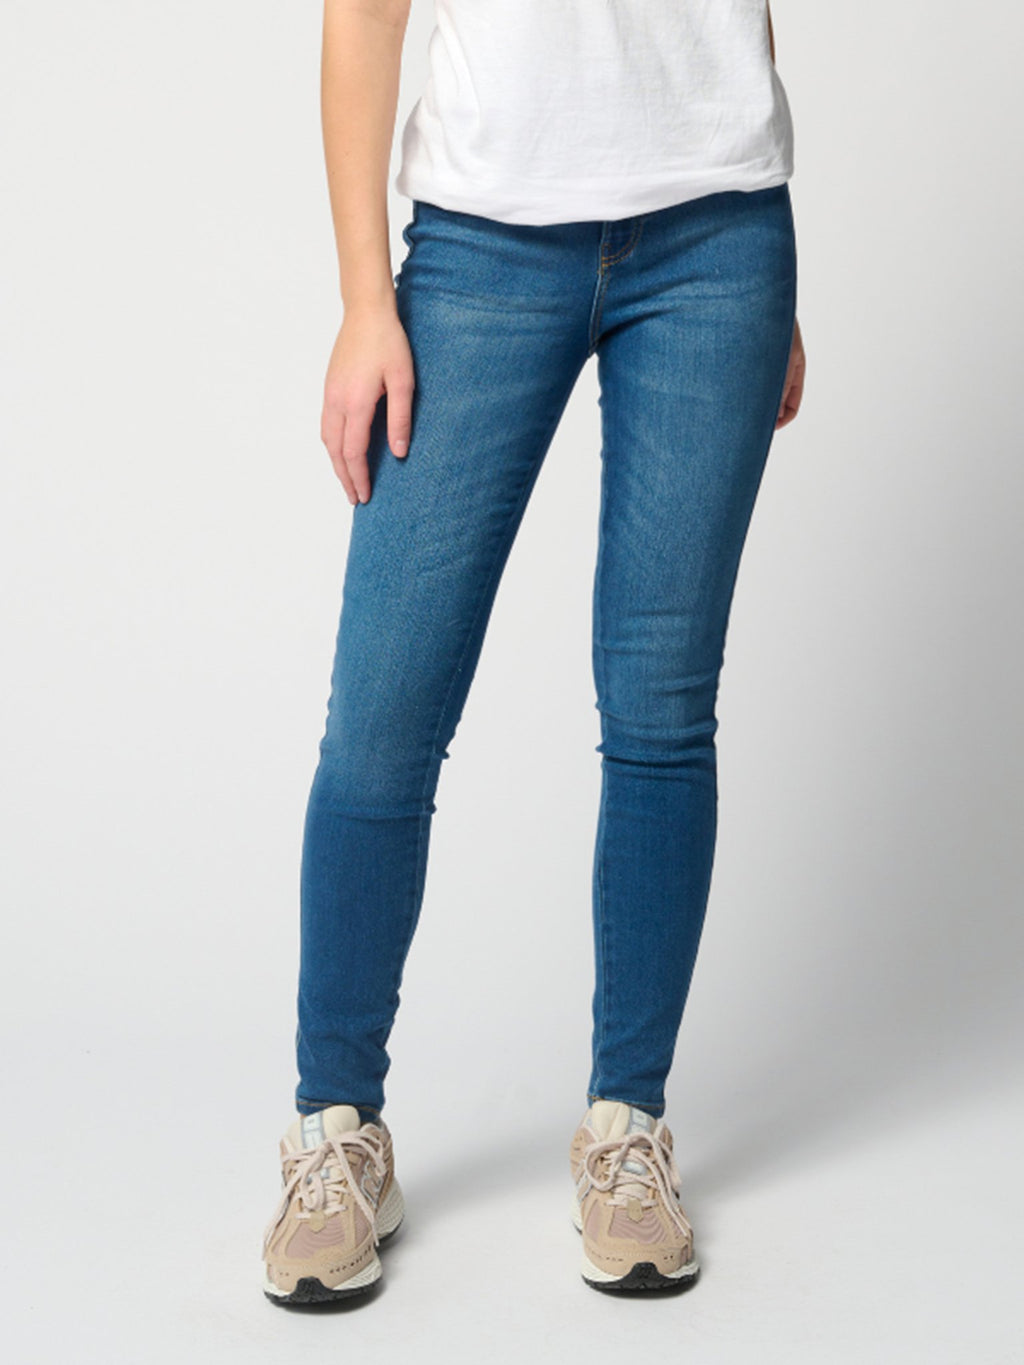 The Original Performance Skinny Jeans ™ ️ Mujeres - Paquete (2 PC).